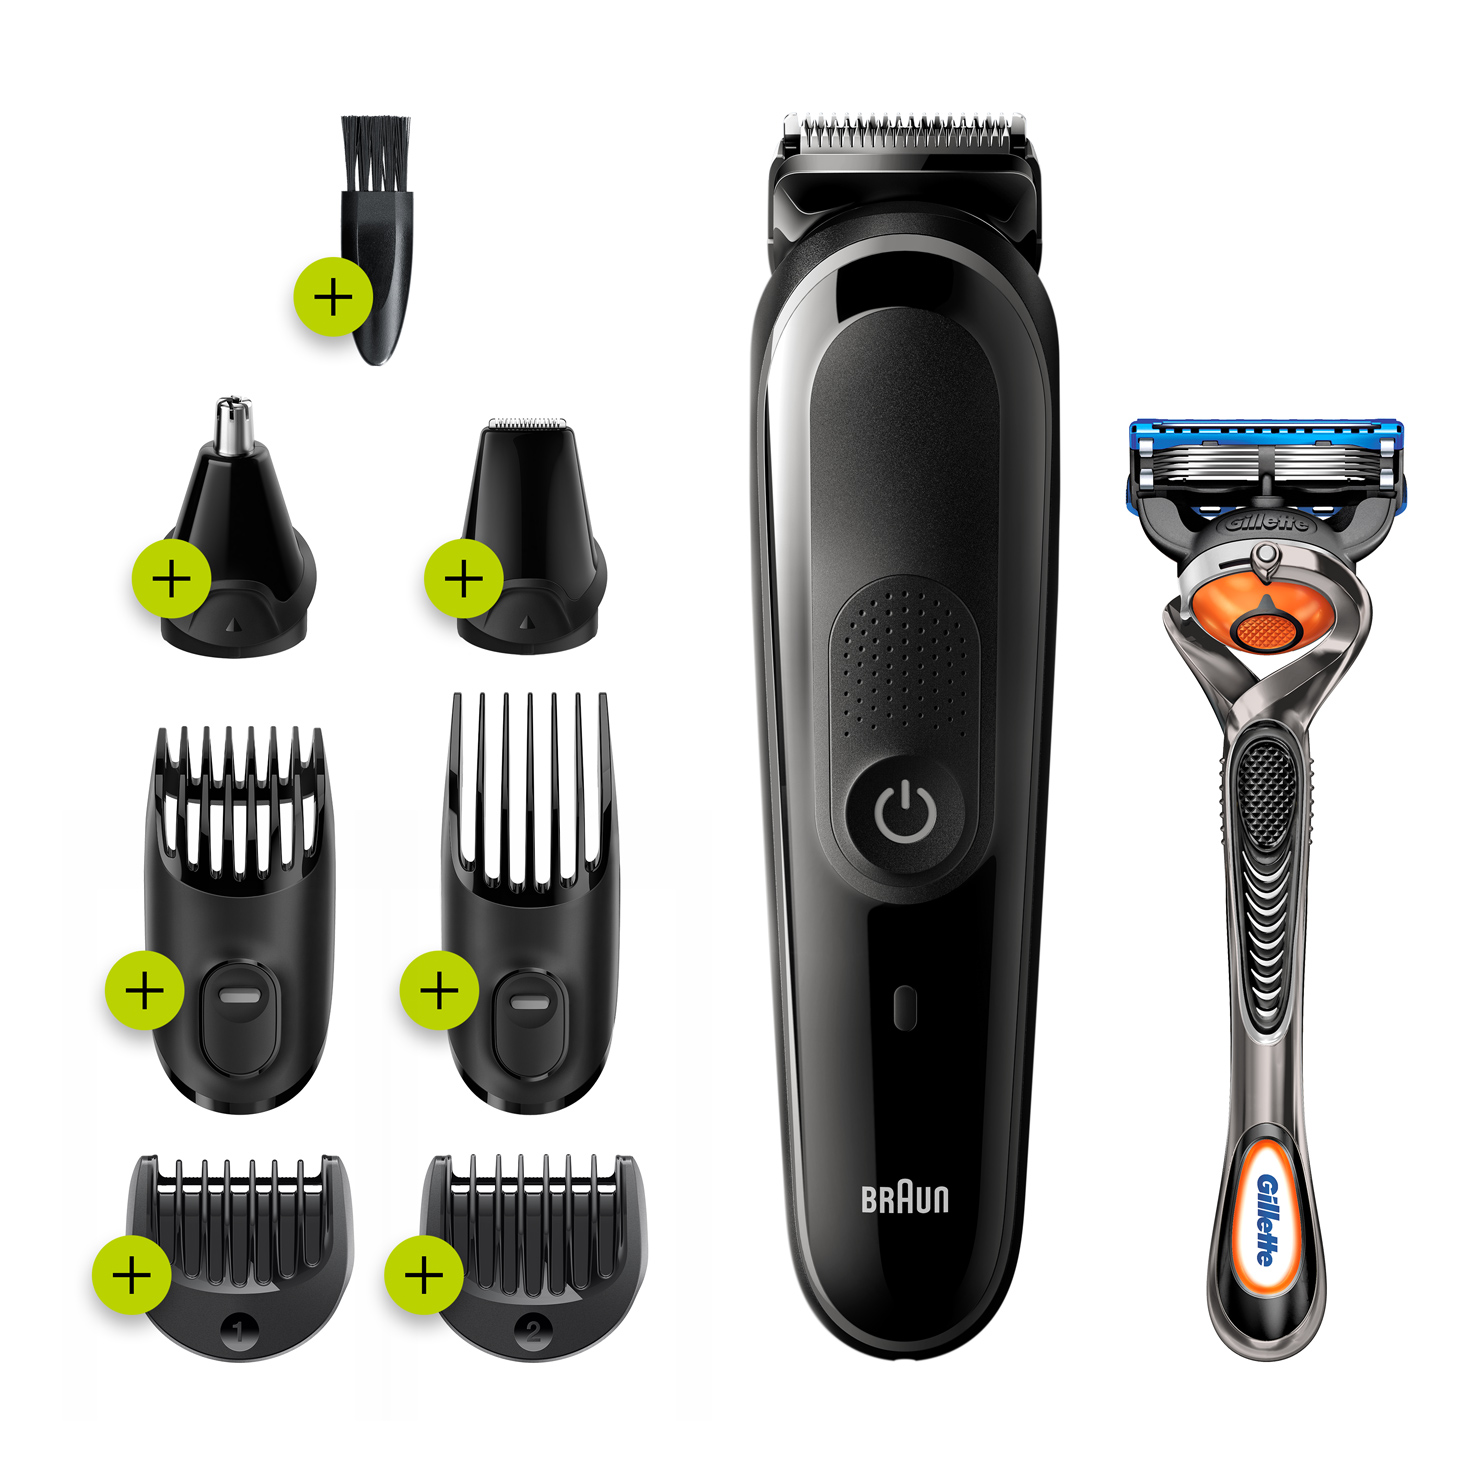 wahl model 9685 charger